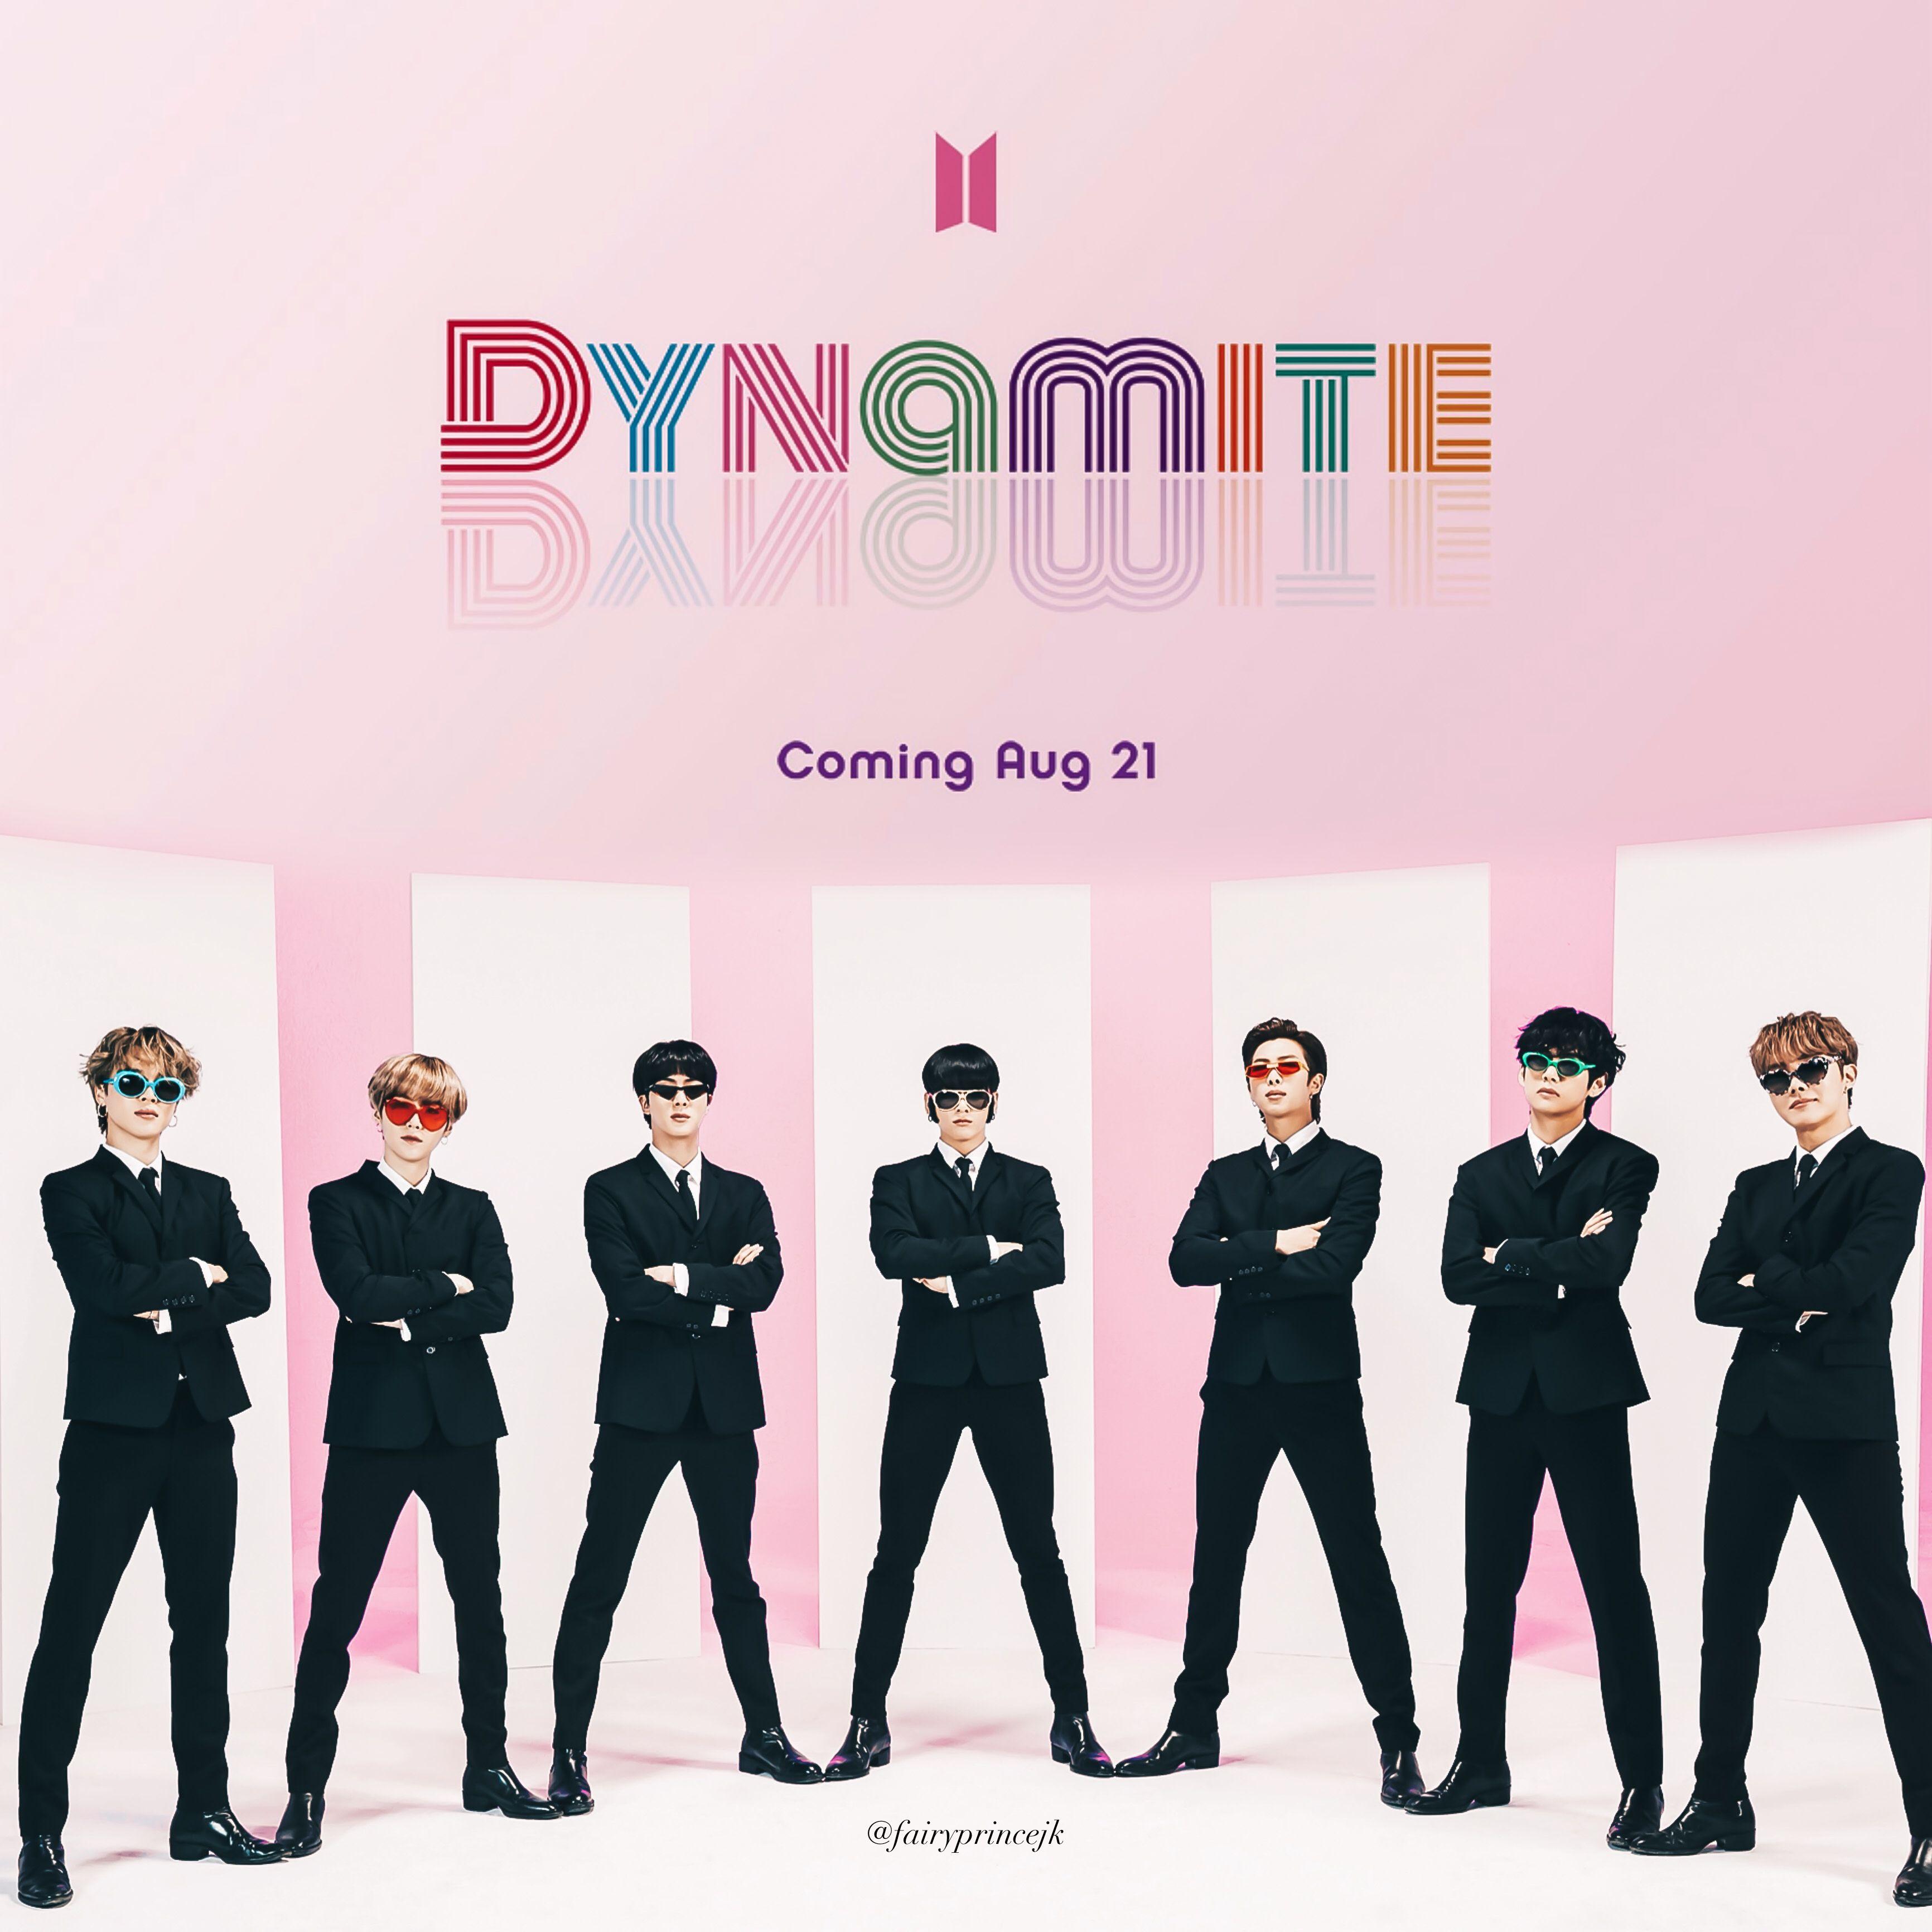 Featured image of post Bts Dynamite Wallpaper Laptop Hd Bts Wallpaper Desktop 2020 Checkout high quality bts wallpapers for android desktop mac laptop smartphones and tablets with different resolutions